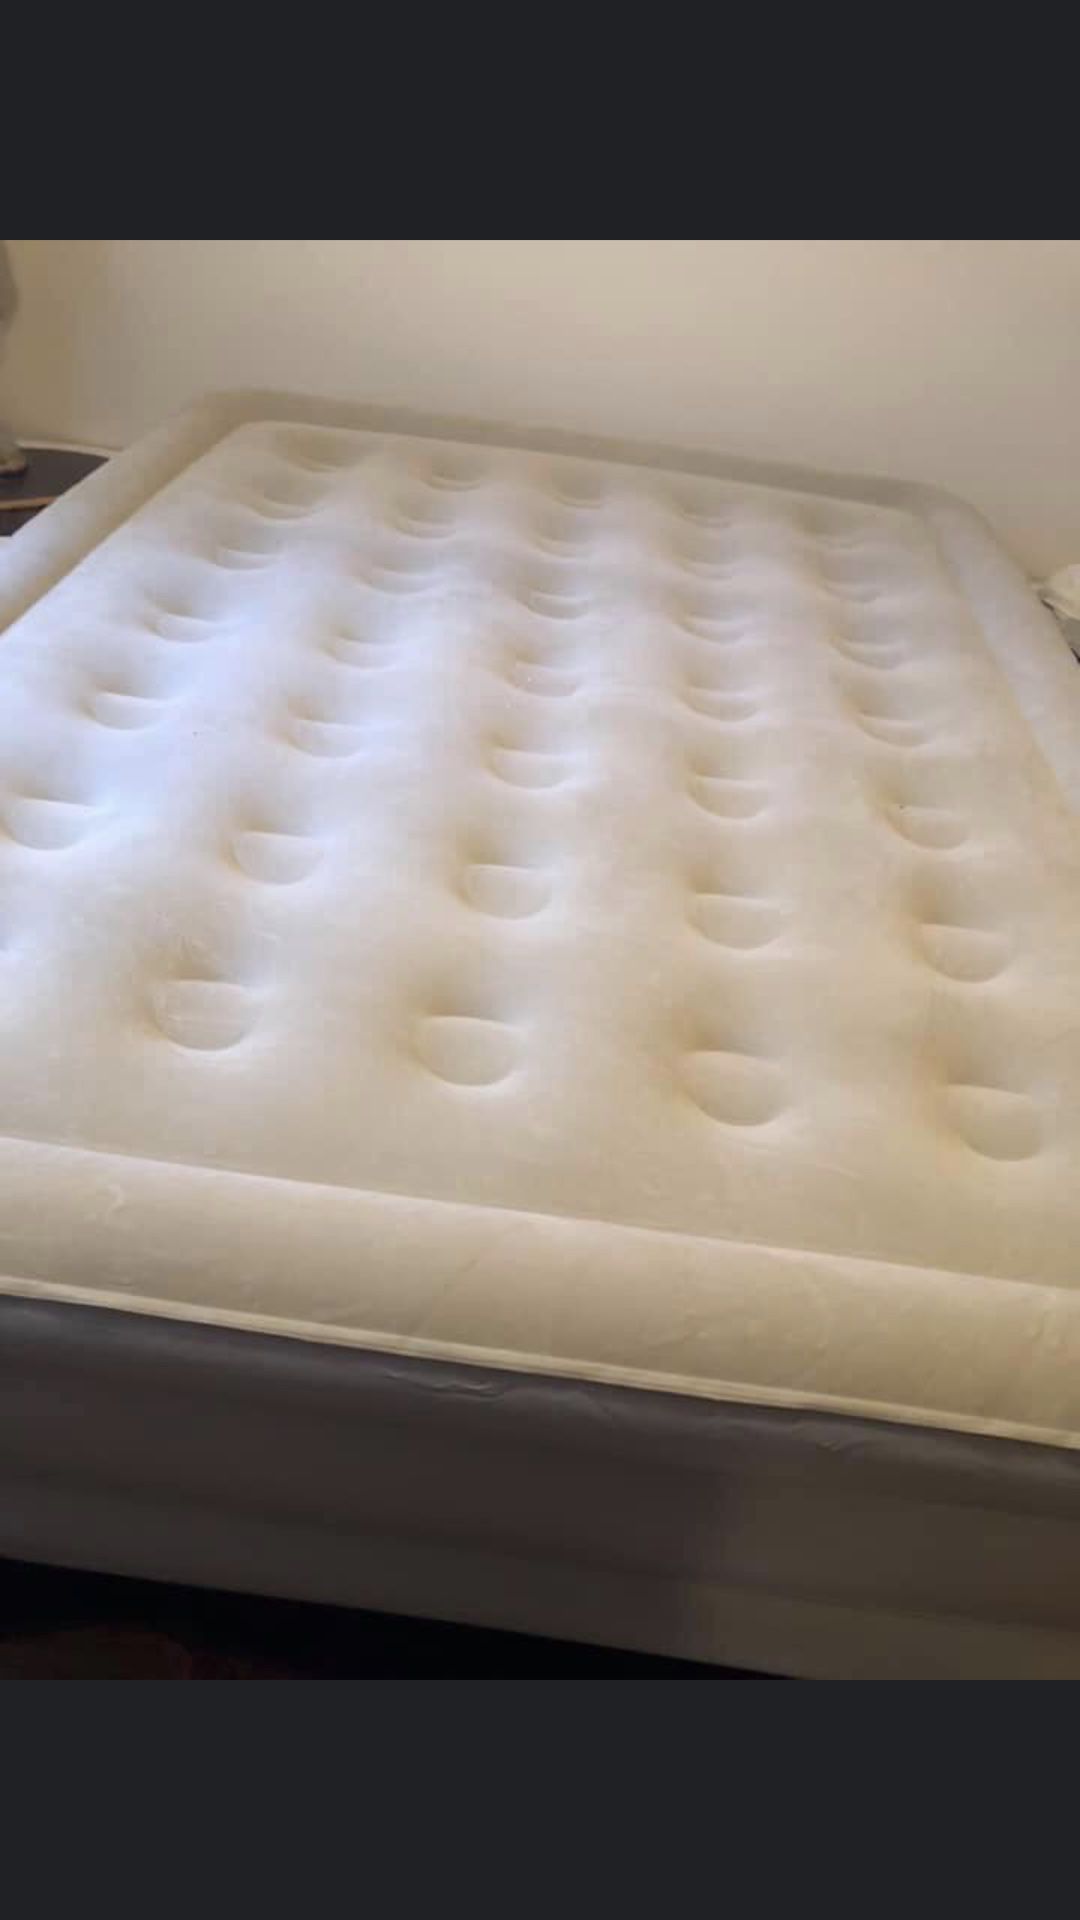 SERTA AIR MATTRESS QUEEN SIZE (GET IT TODAY FOR ONLY $70.00)